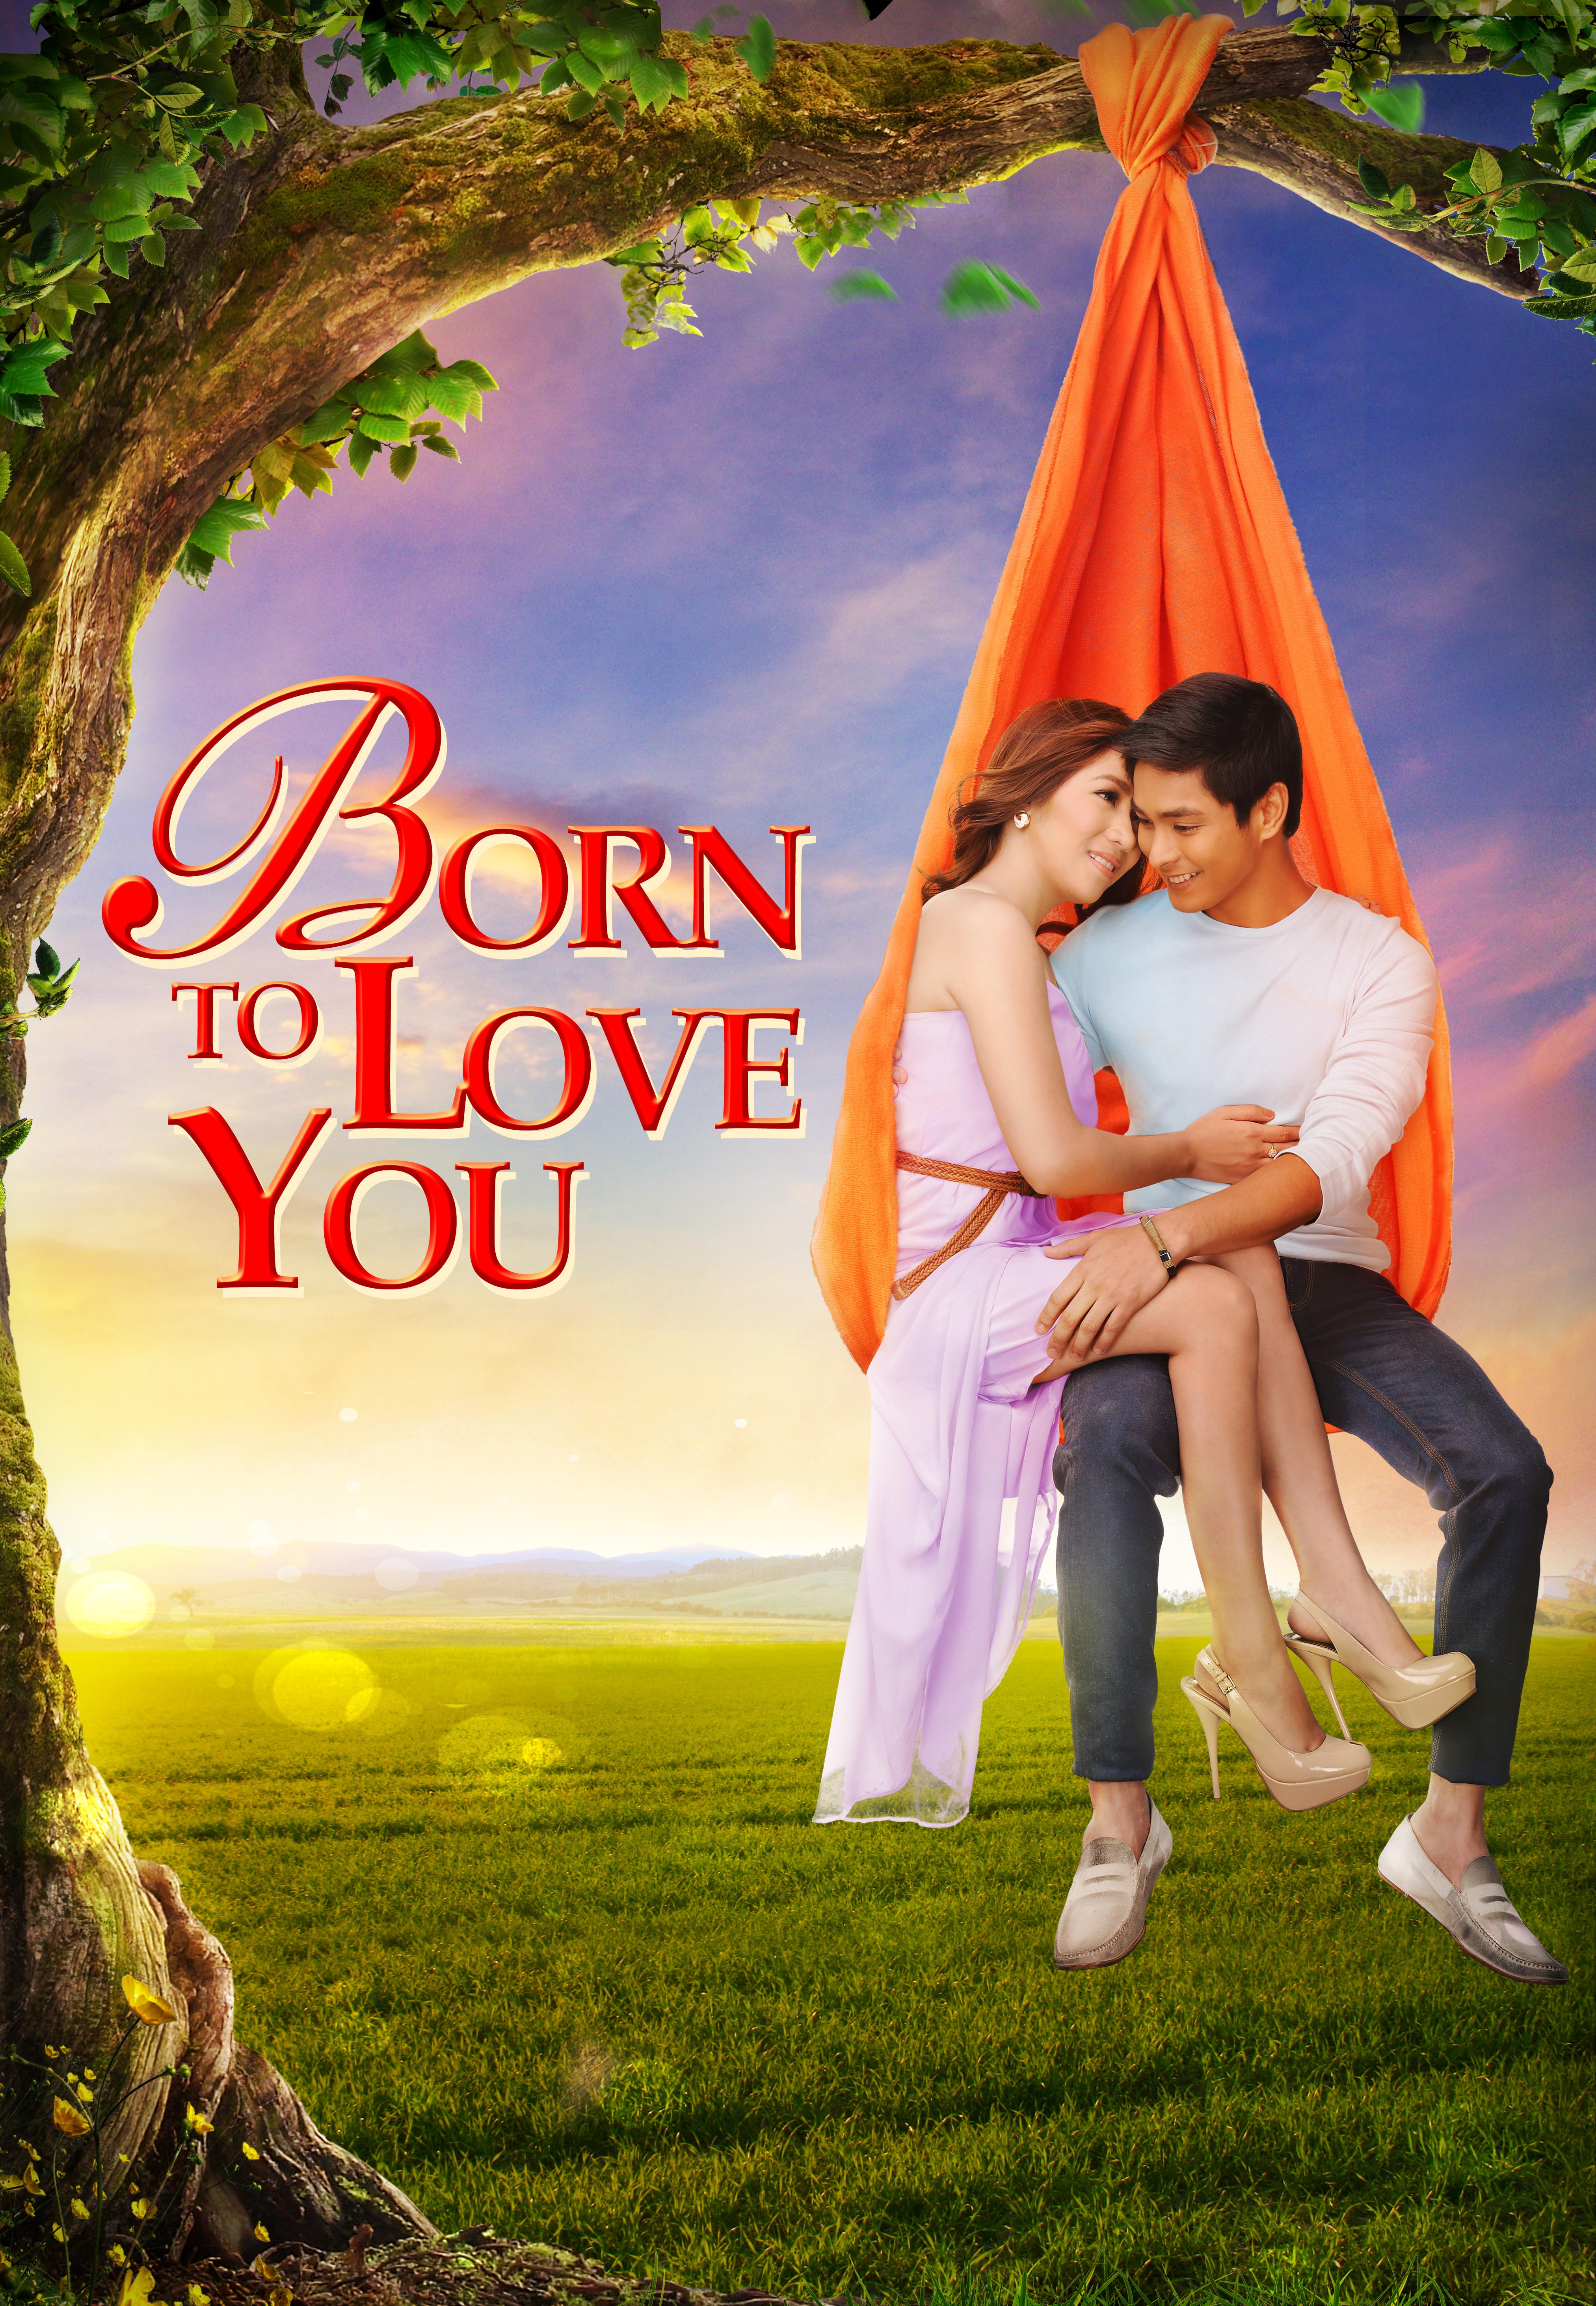 https://data-corporate.abs-cbn.com/corp/medialibrary/dotcom/isd_cast/298x442/born-to-love-you-poster-final_1.jpg?ext=.jpg